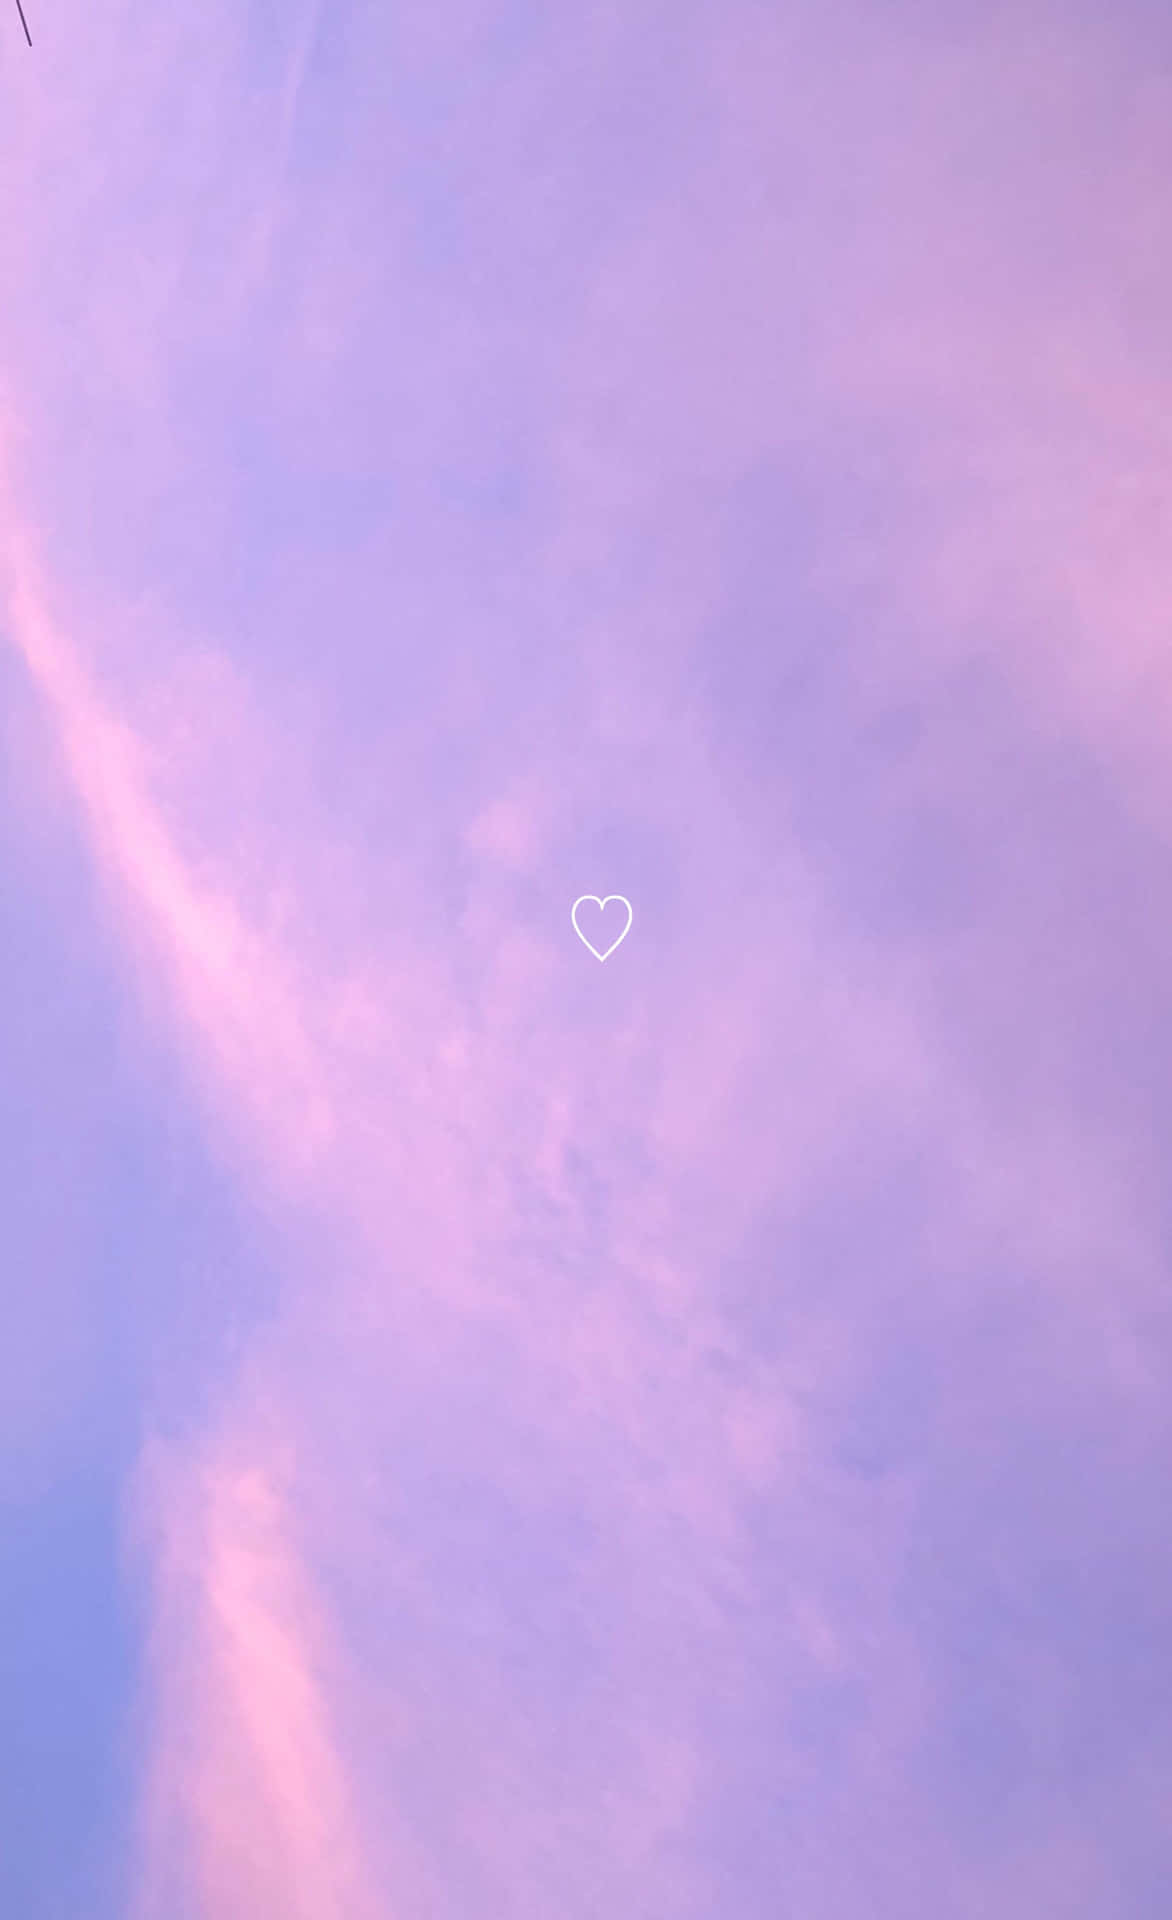 Lavender Purple Clouds With Minimalist Heart Wallpaper